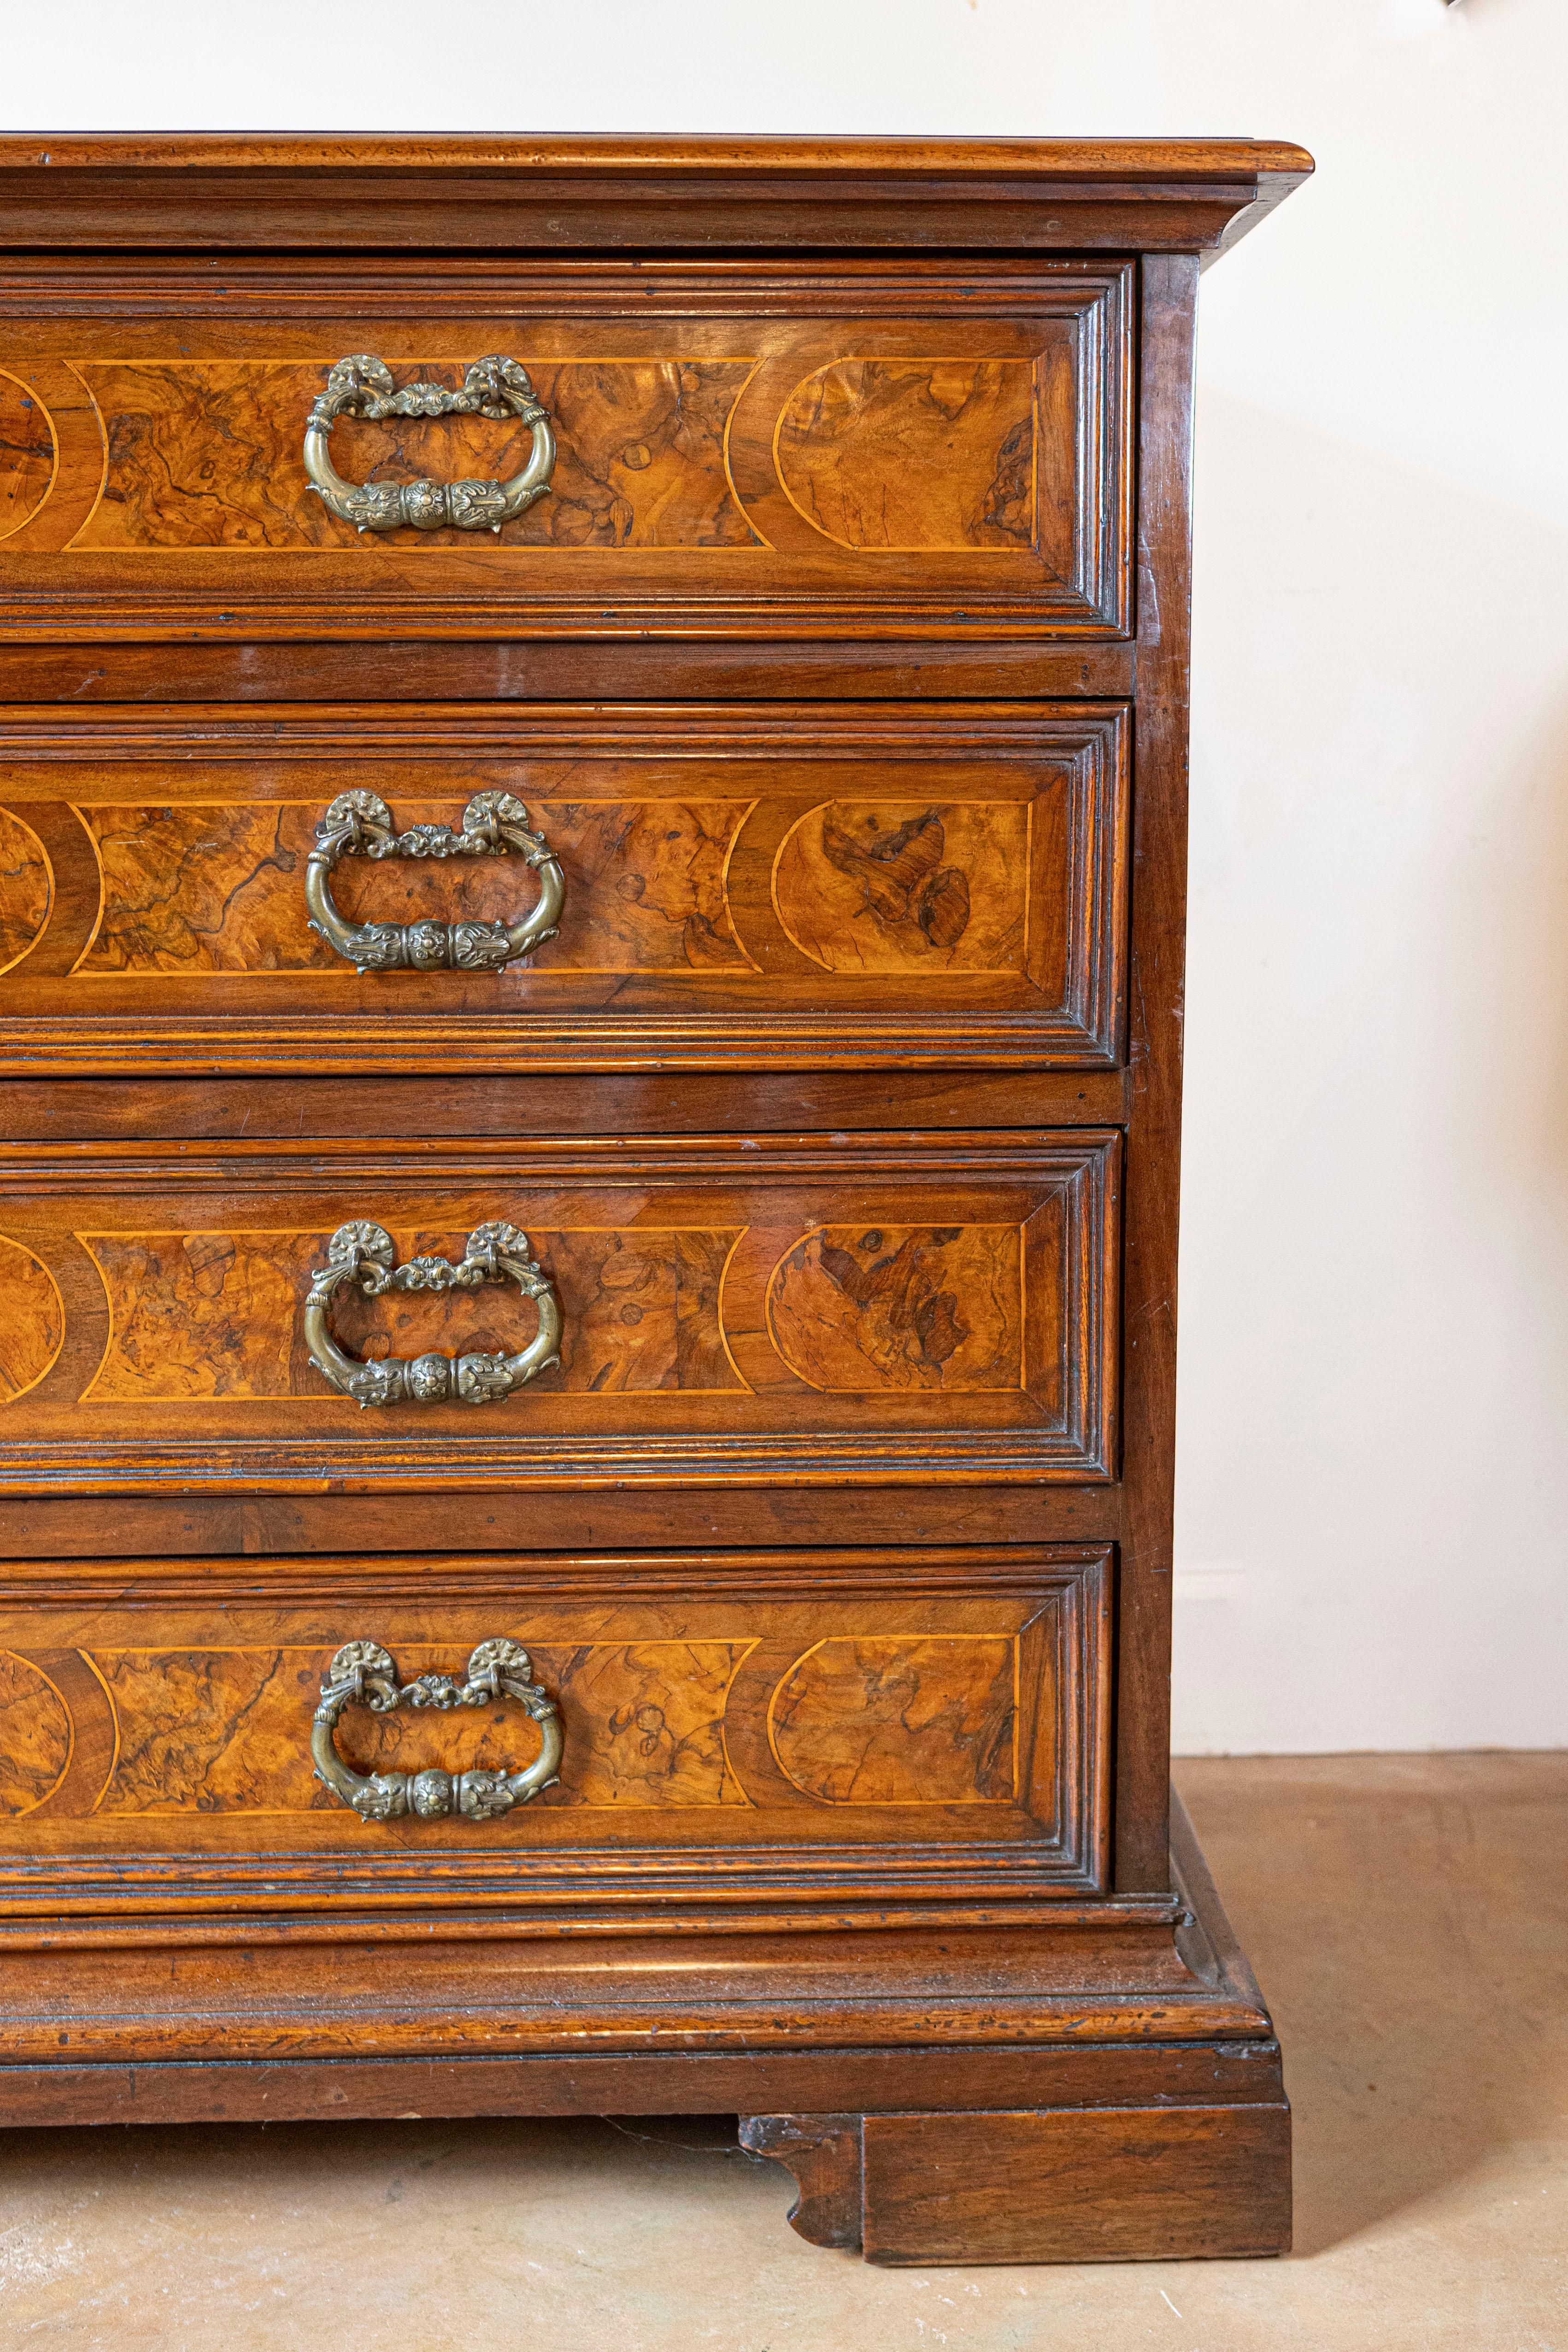 18th Century Italian Walnut Commode with Four Drawers and Ornate Hardware For Sale 3